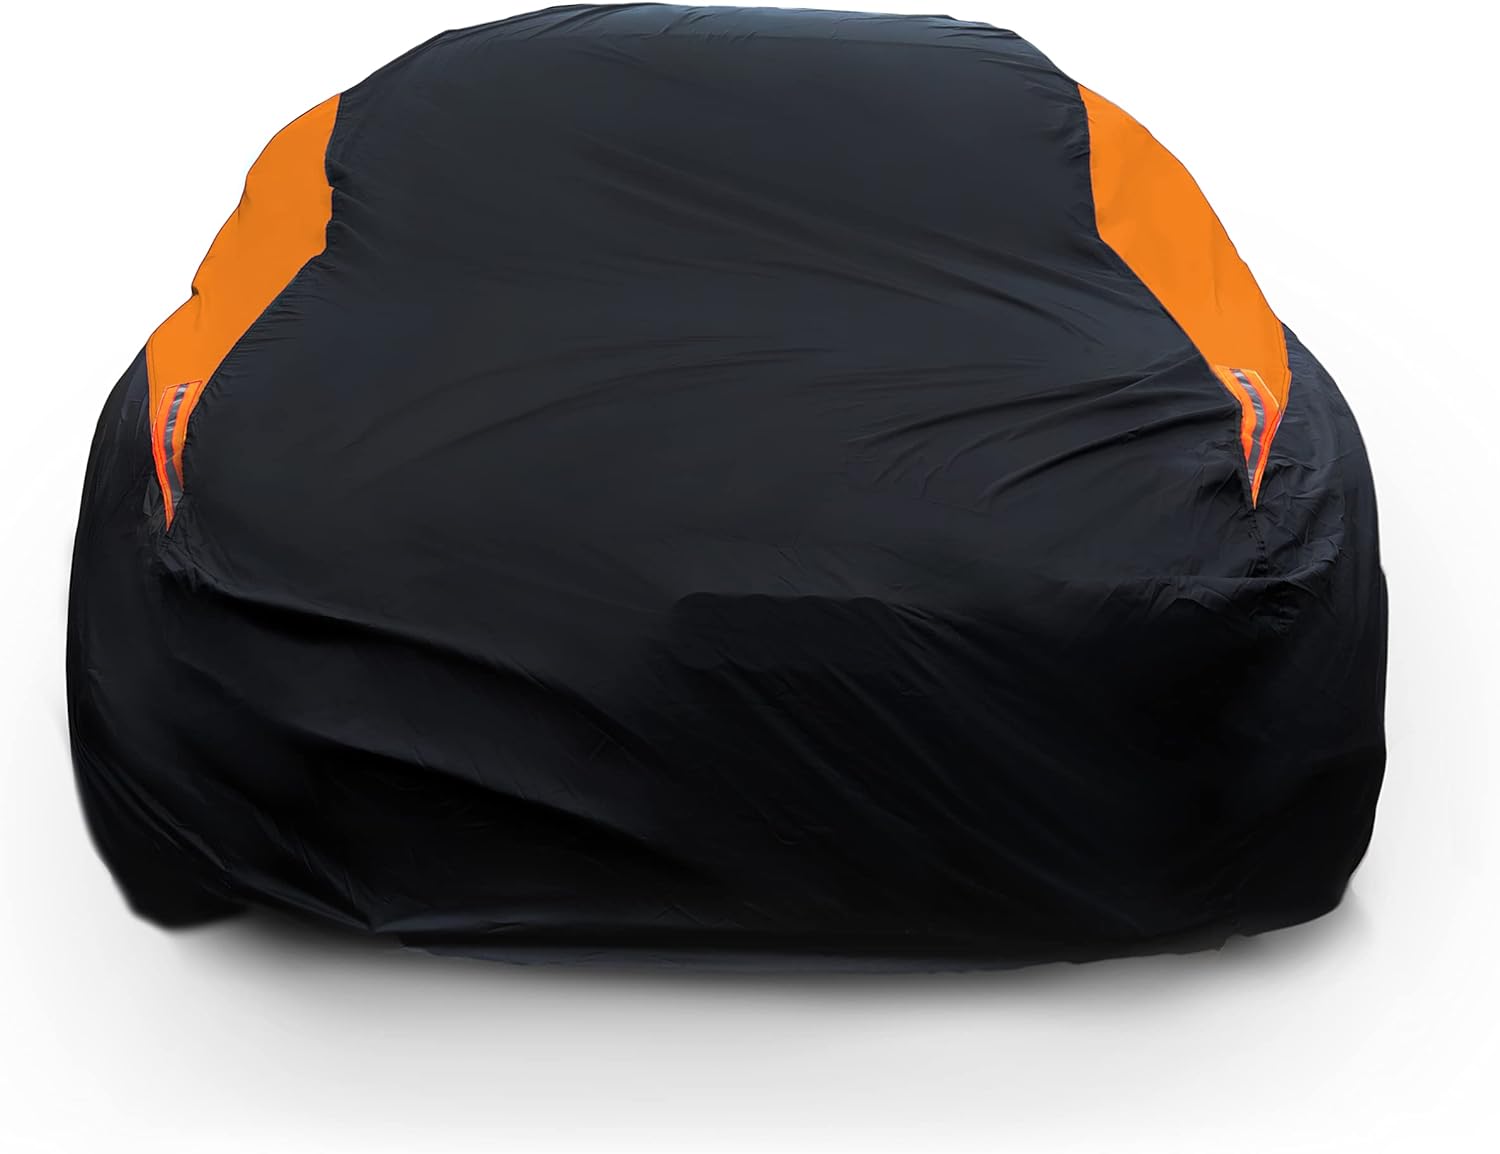 Waterproof Car Cover All Weather Snowproof UV Protection Windproof Outdoor Full car Cover, Universal Fit for Sedan (Fit Sedan Length 186-193 inch, Orange)